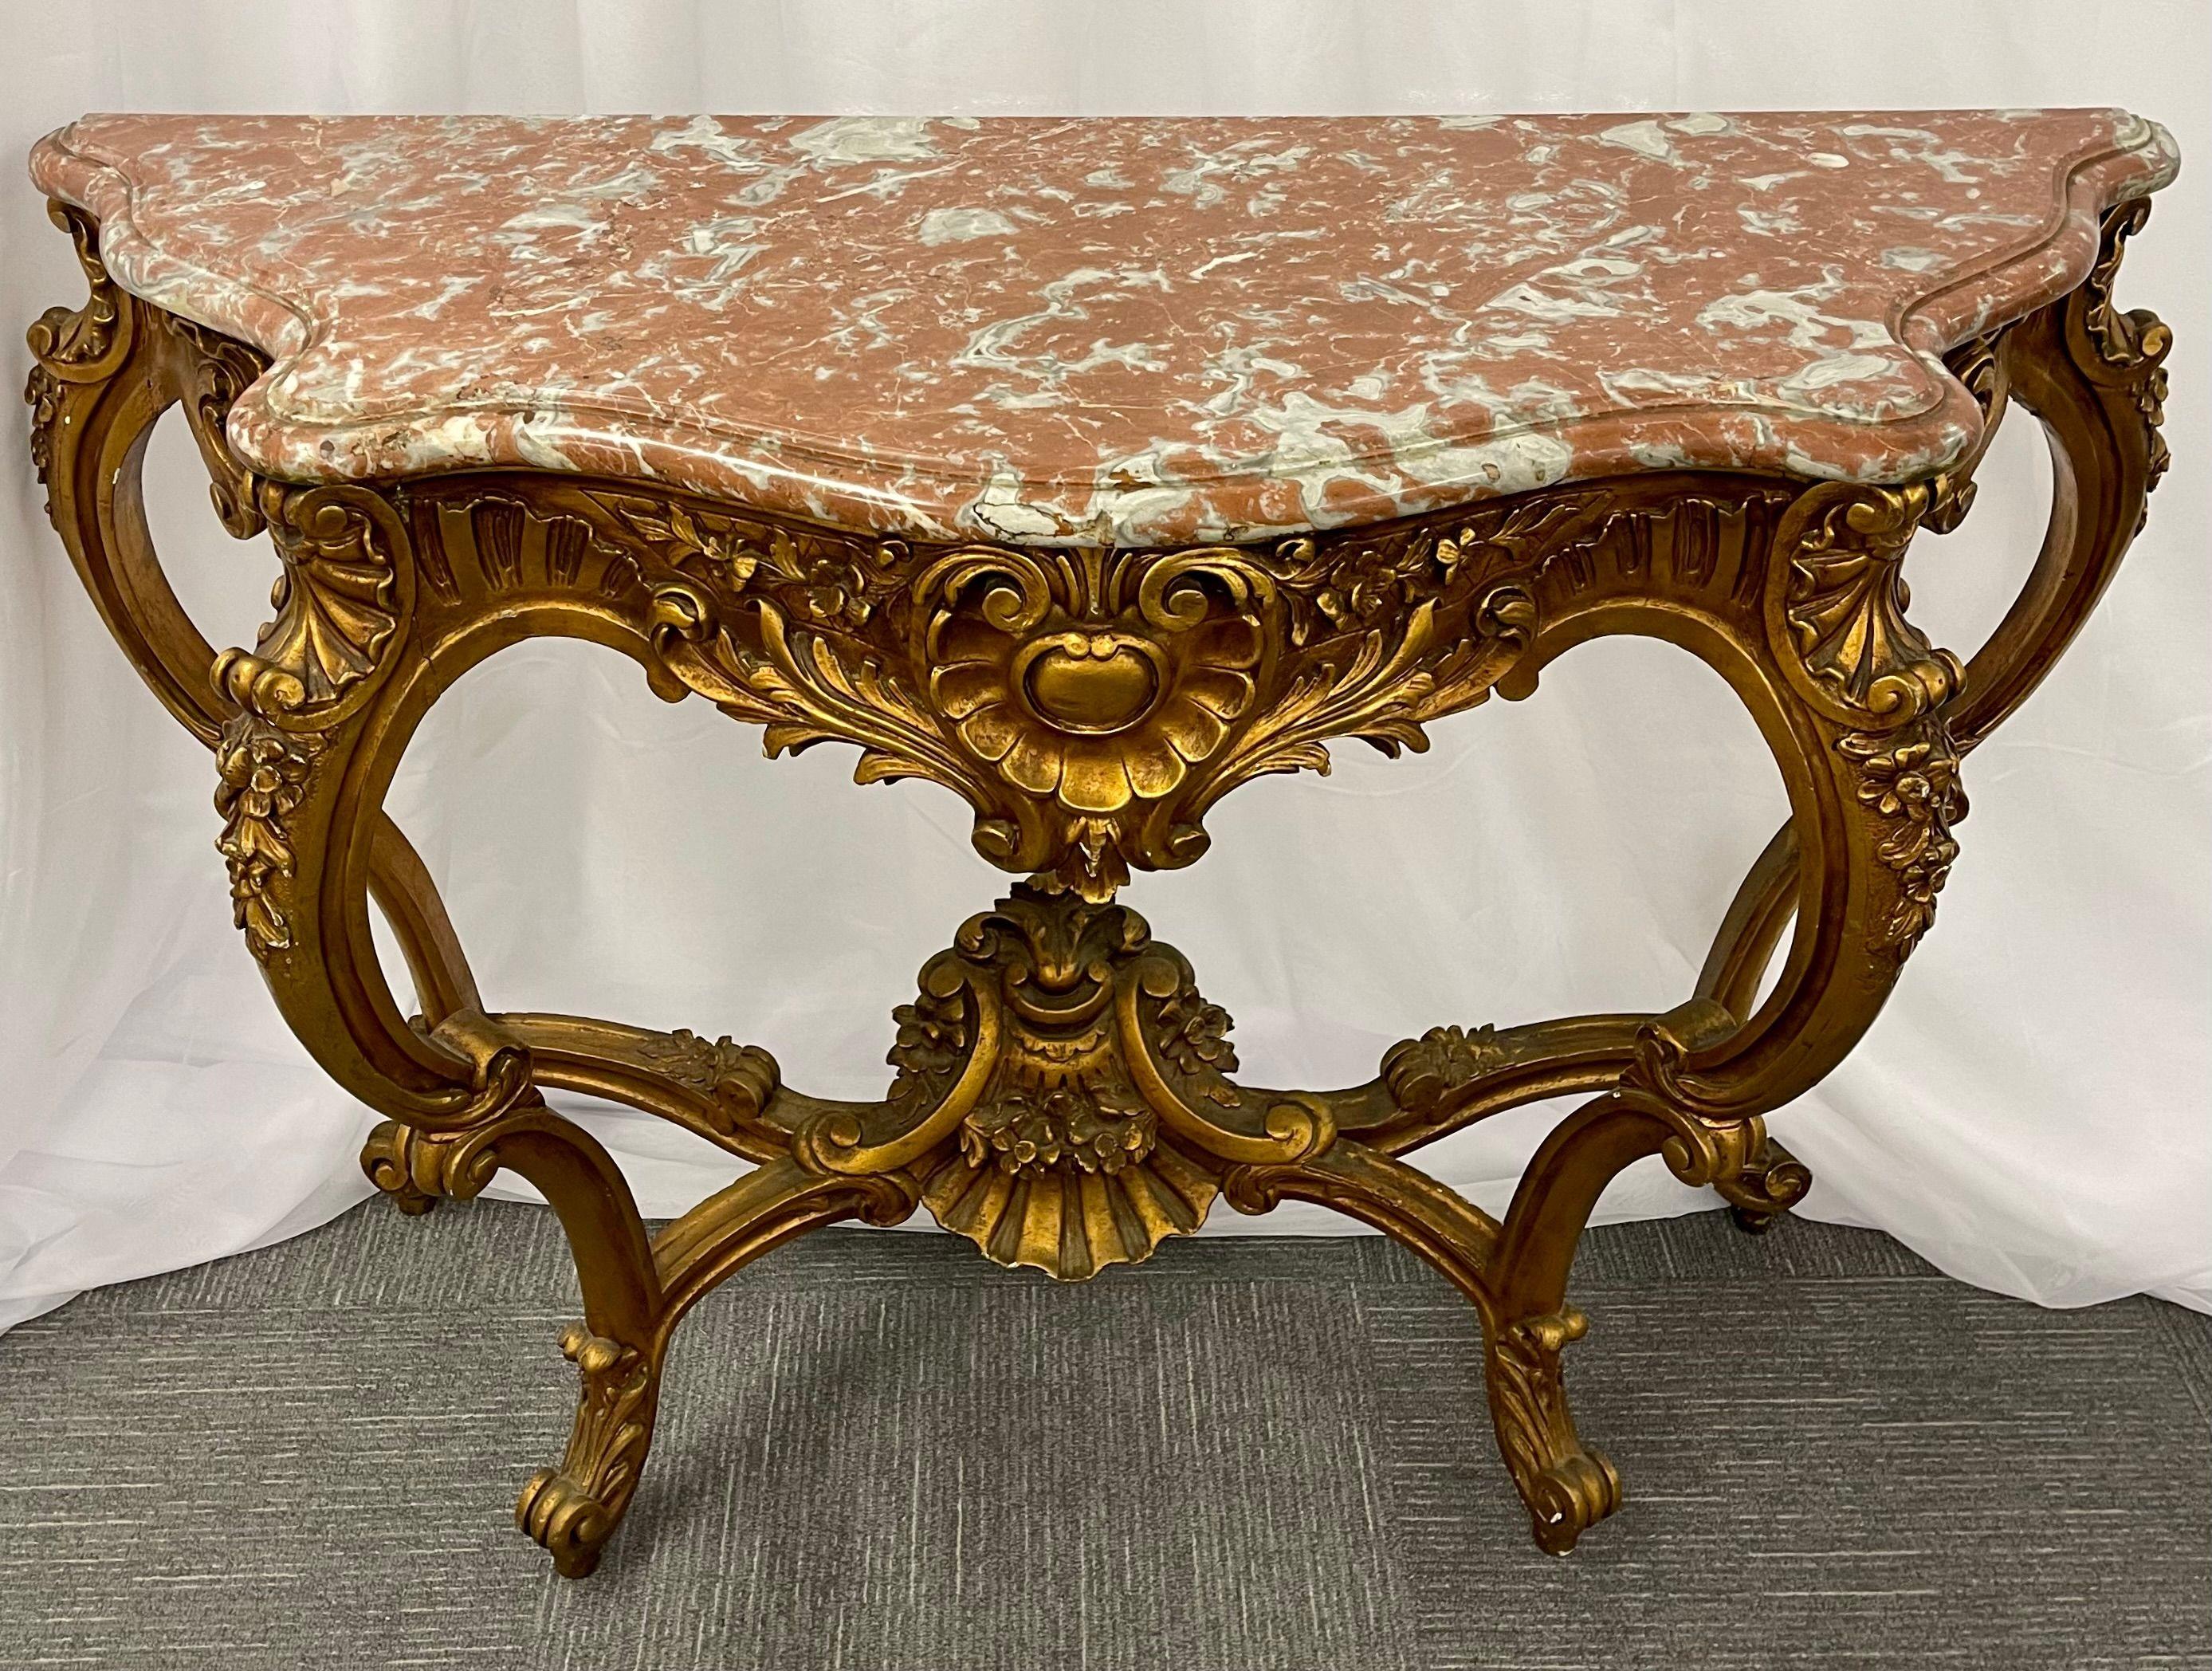 19th Century Marble-Top Louis XV Style Console Table by Jansen Exquisite Carved Details 1920s For Sale